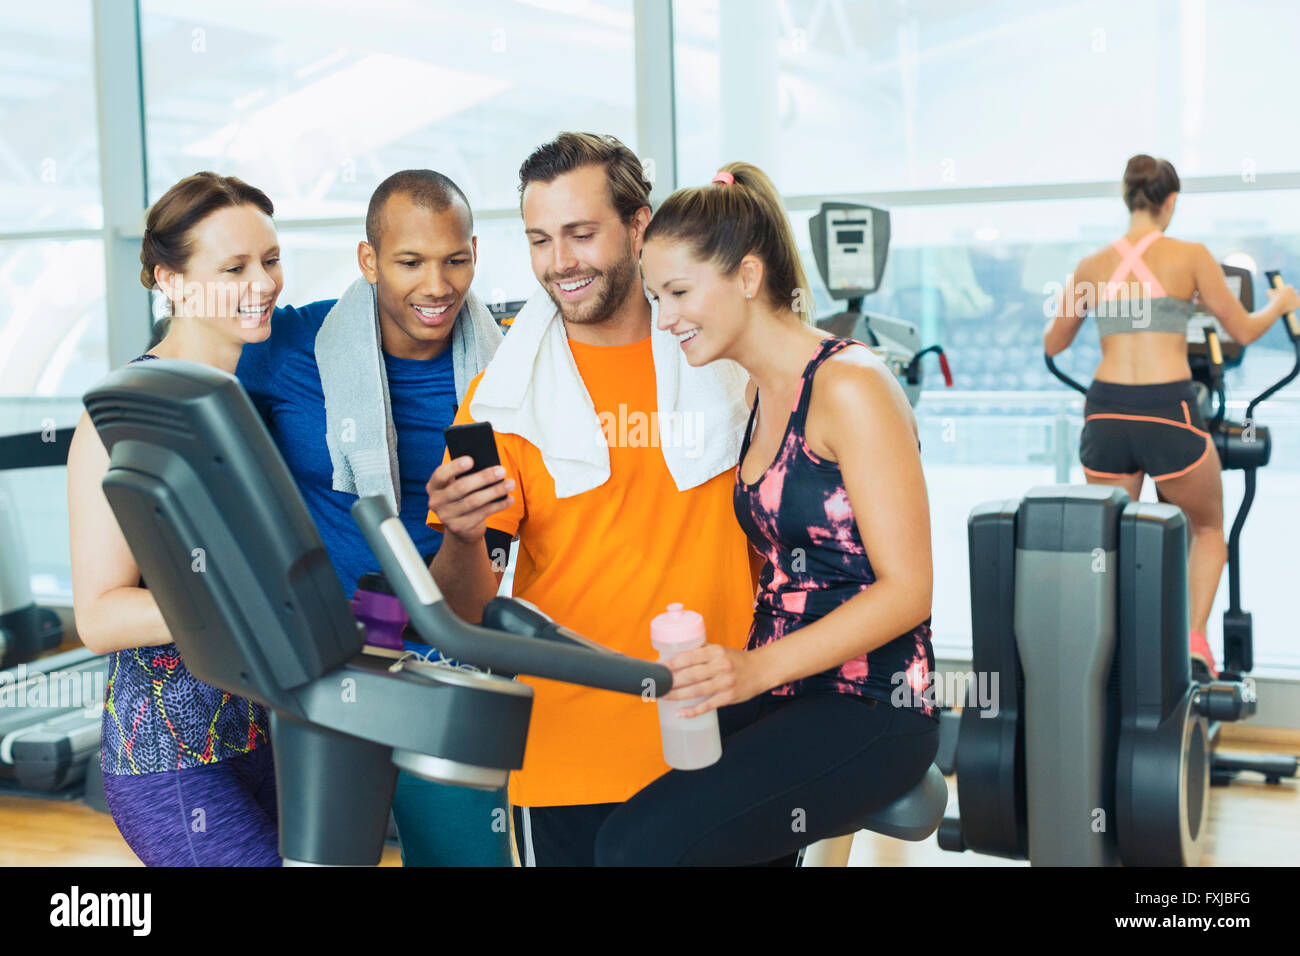 Smiling friends using cell phone at exercise bike in gym Banque D'Images